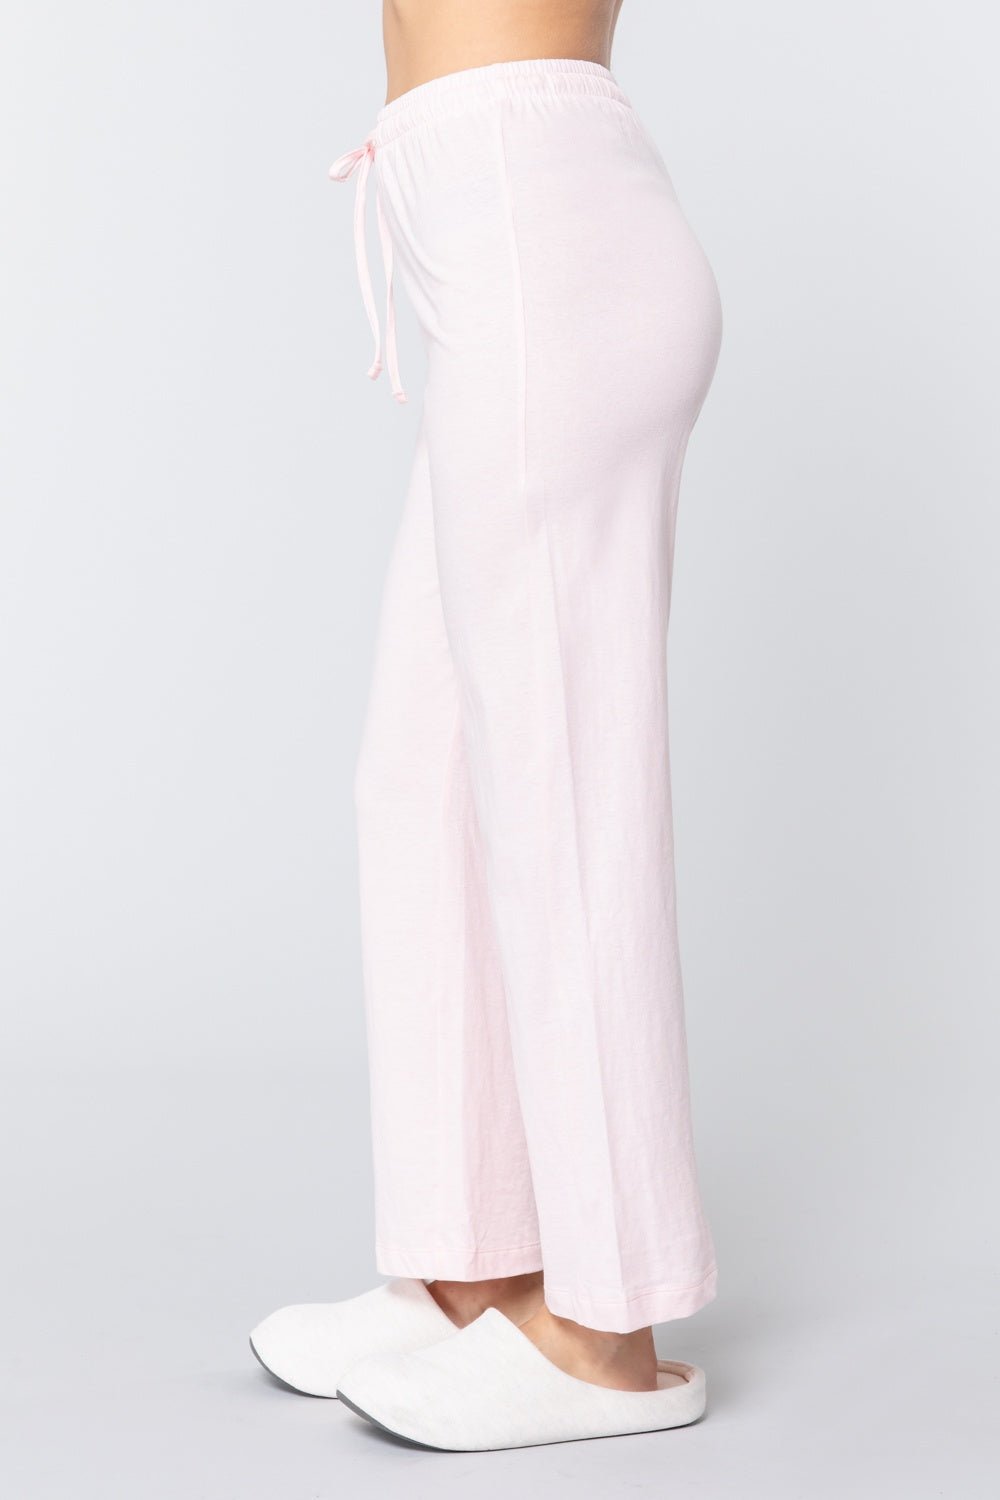 Our Best Solid Color 100% Cotton Drawstring Waist Pajama Pants (Light Pink)